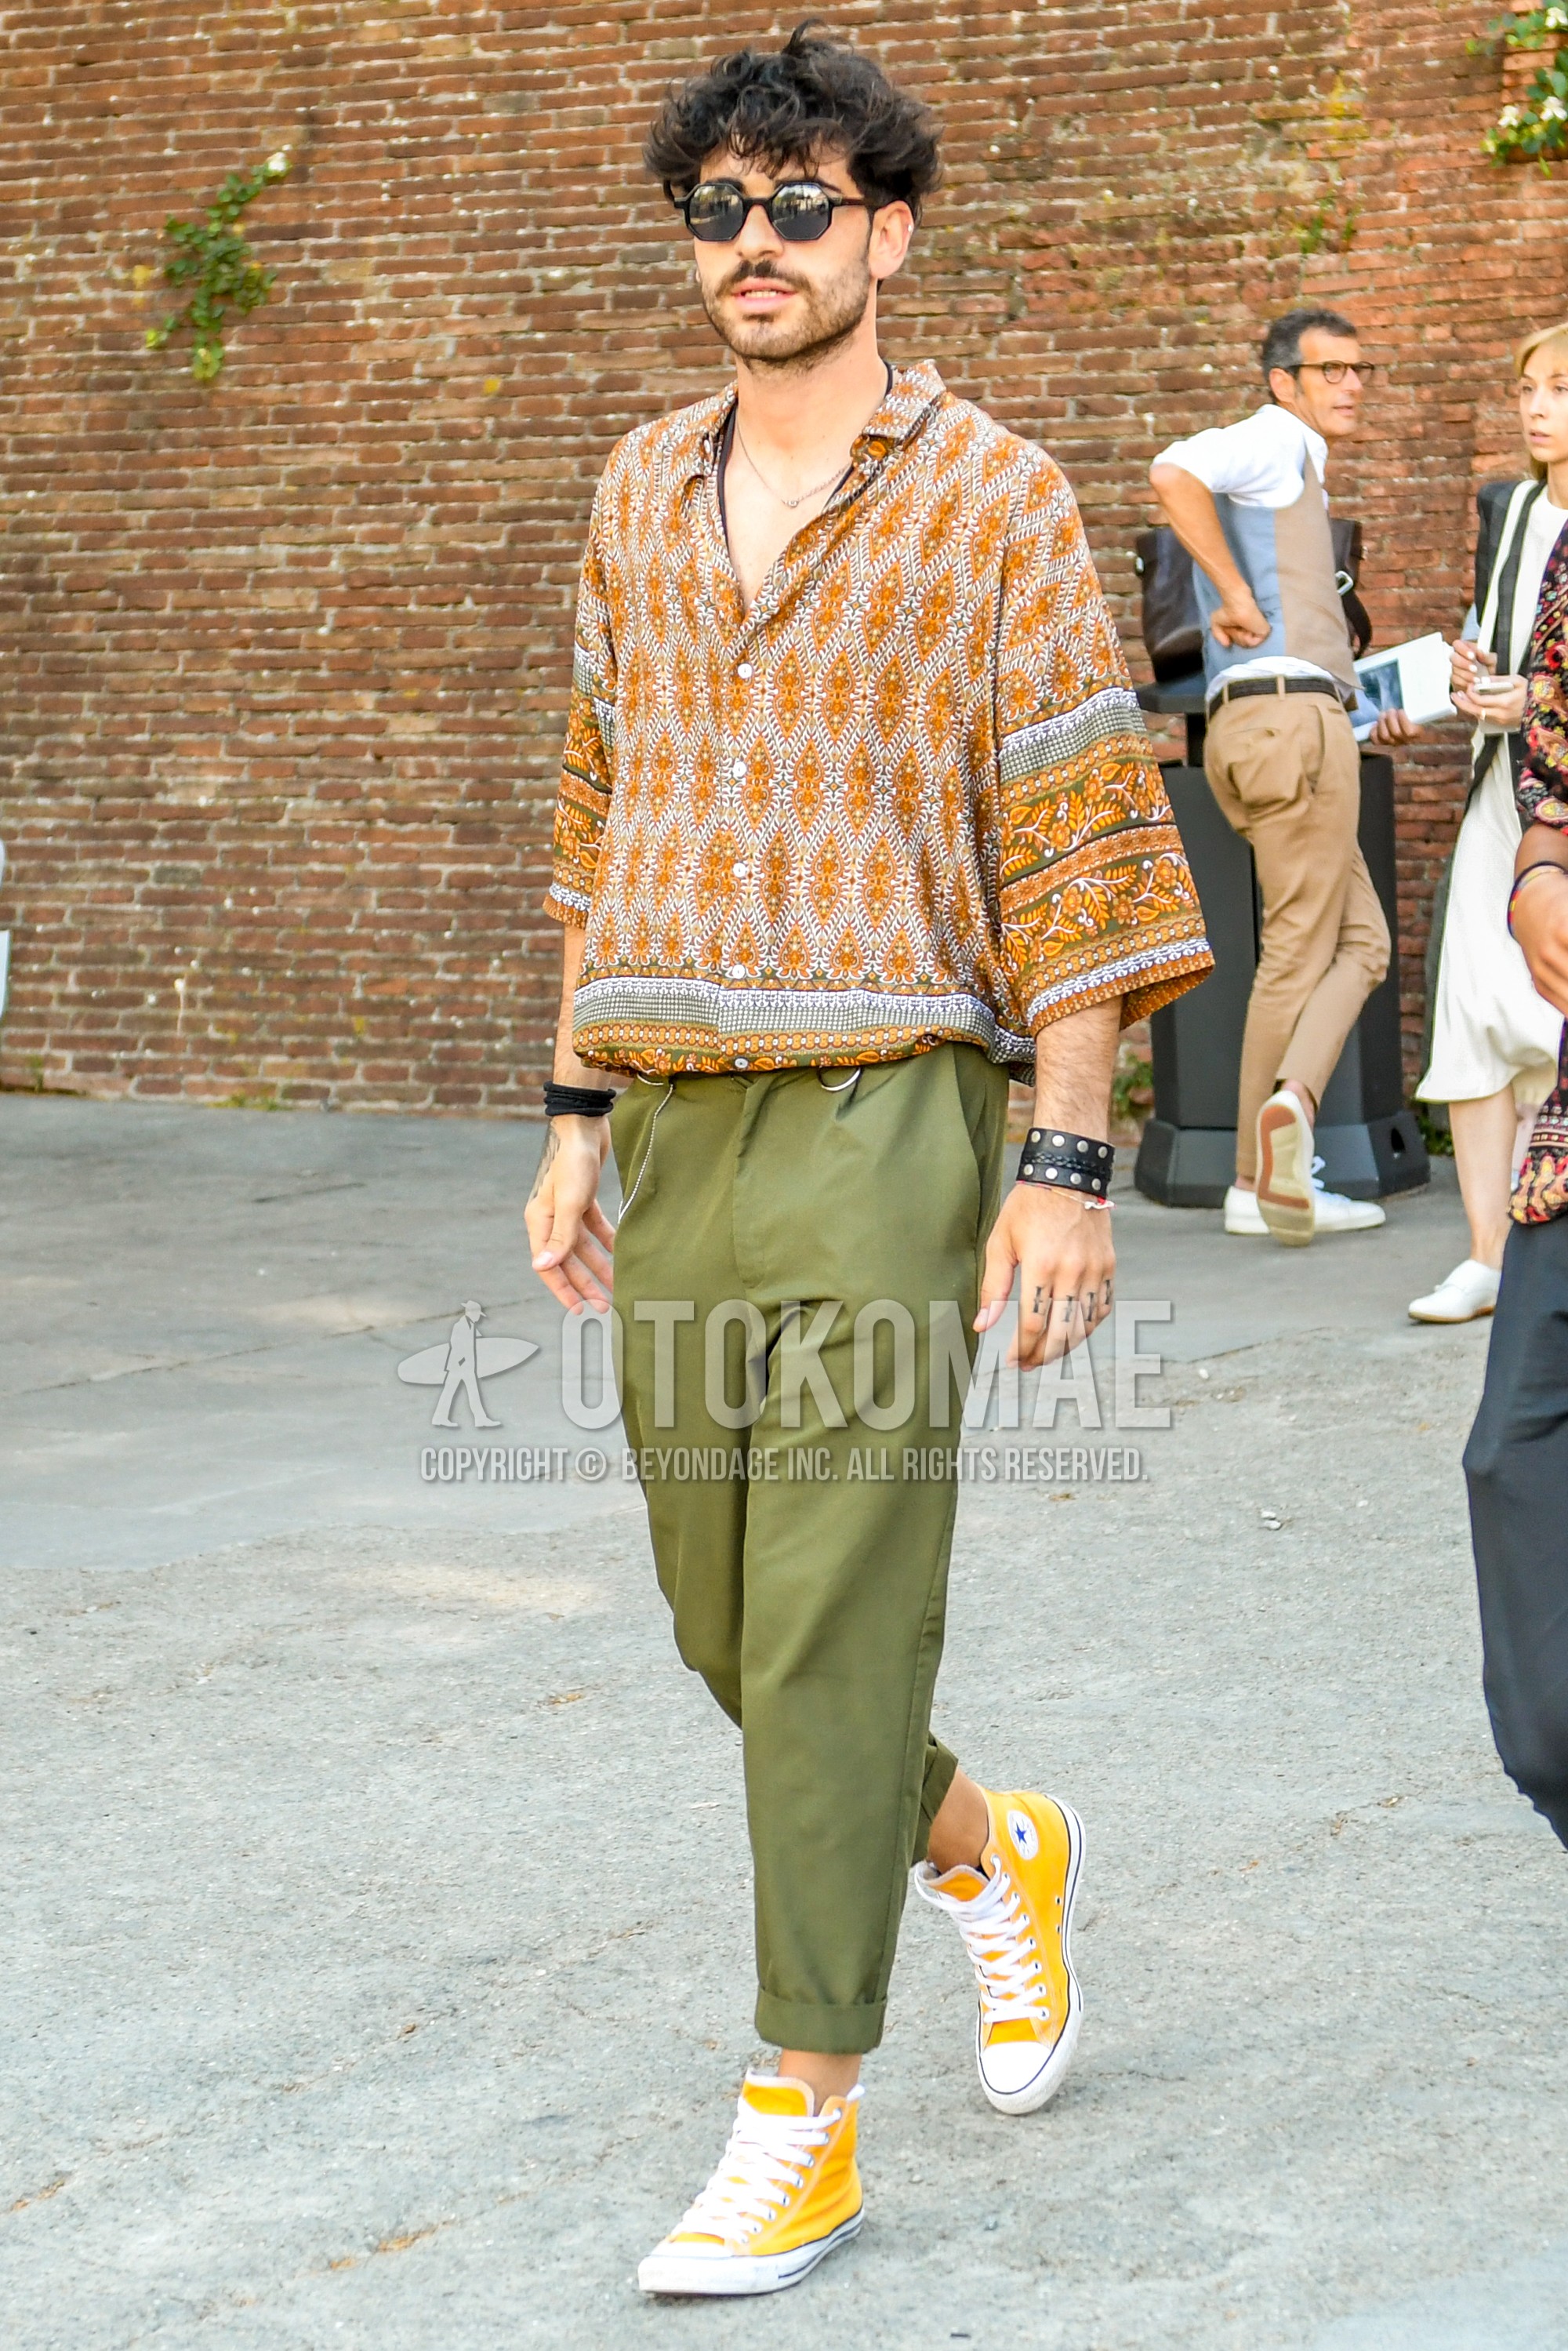 Men's spring summer outfit with plain sunglasses, orange tops/innerwear shirt, olive green plain chinos, yellow high-cut sneakers.